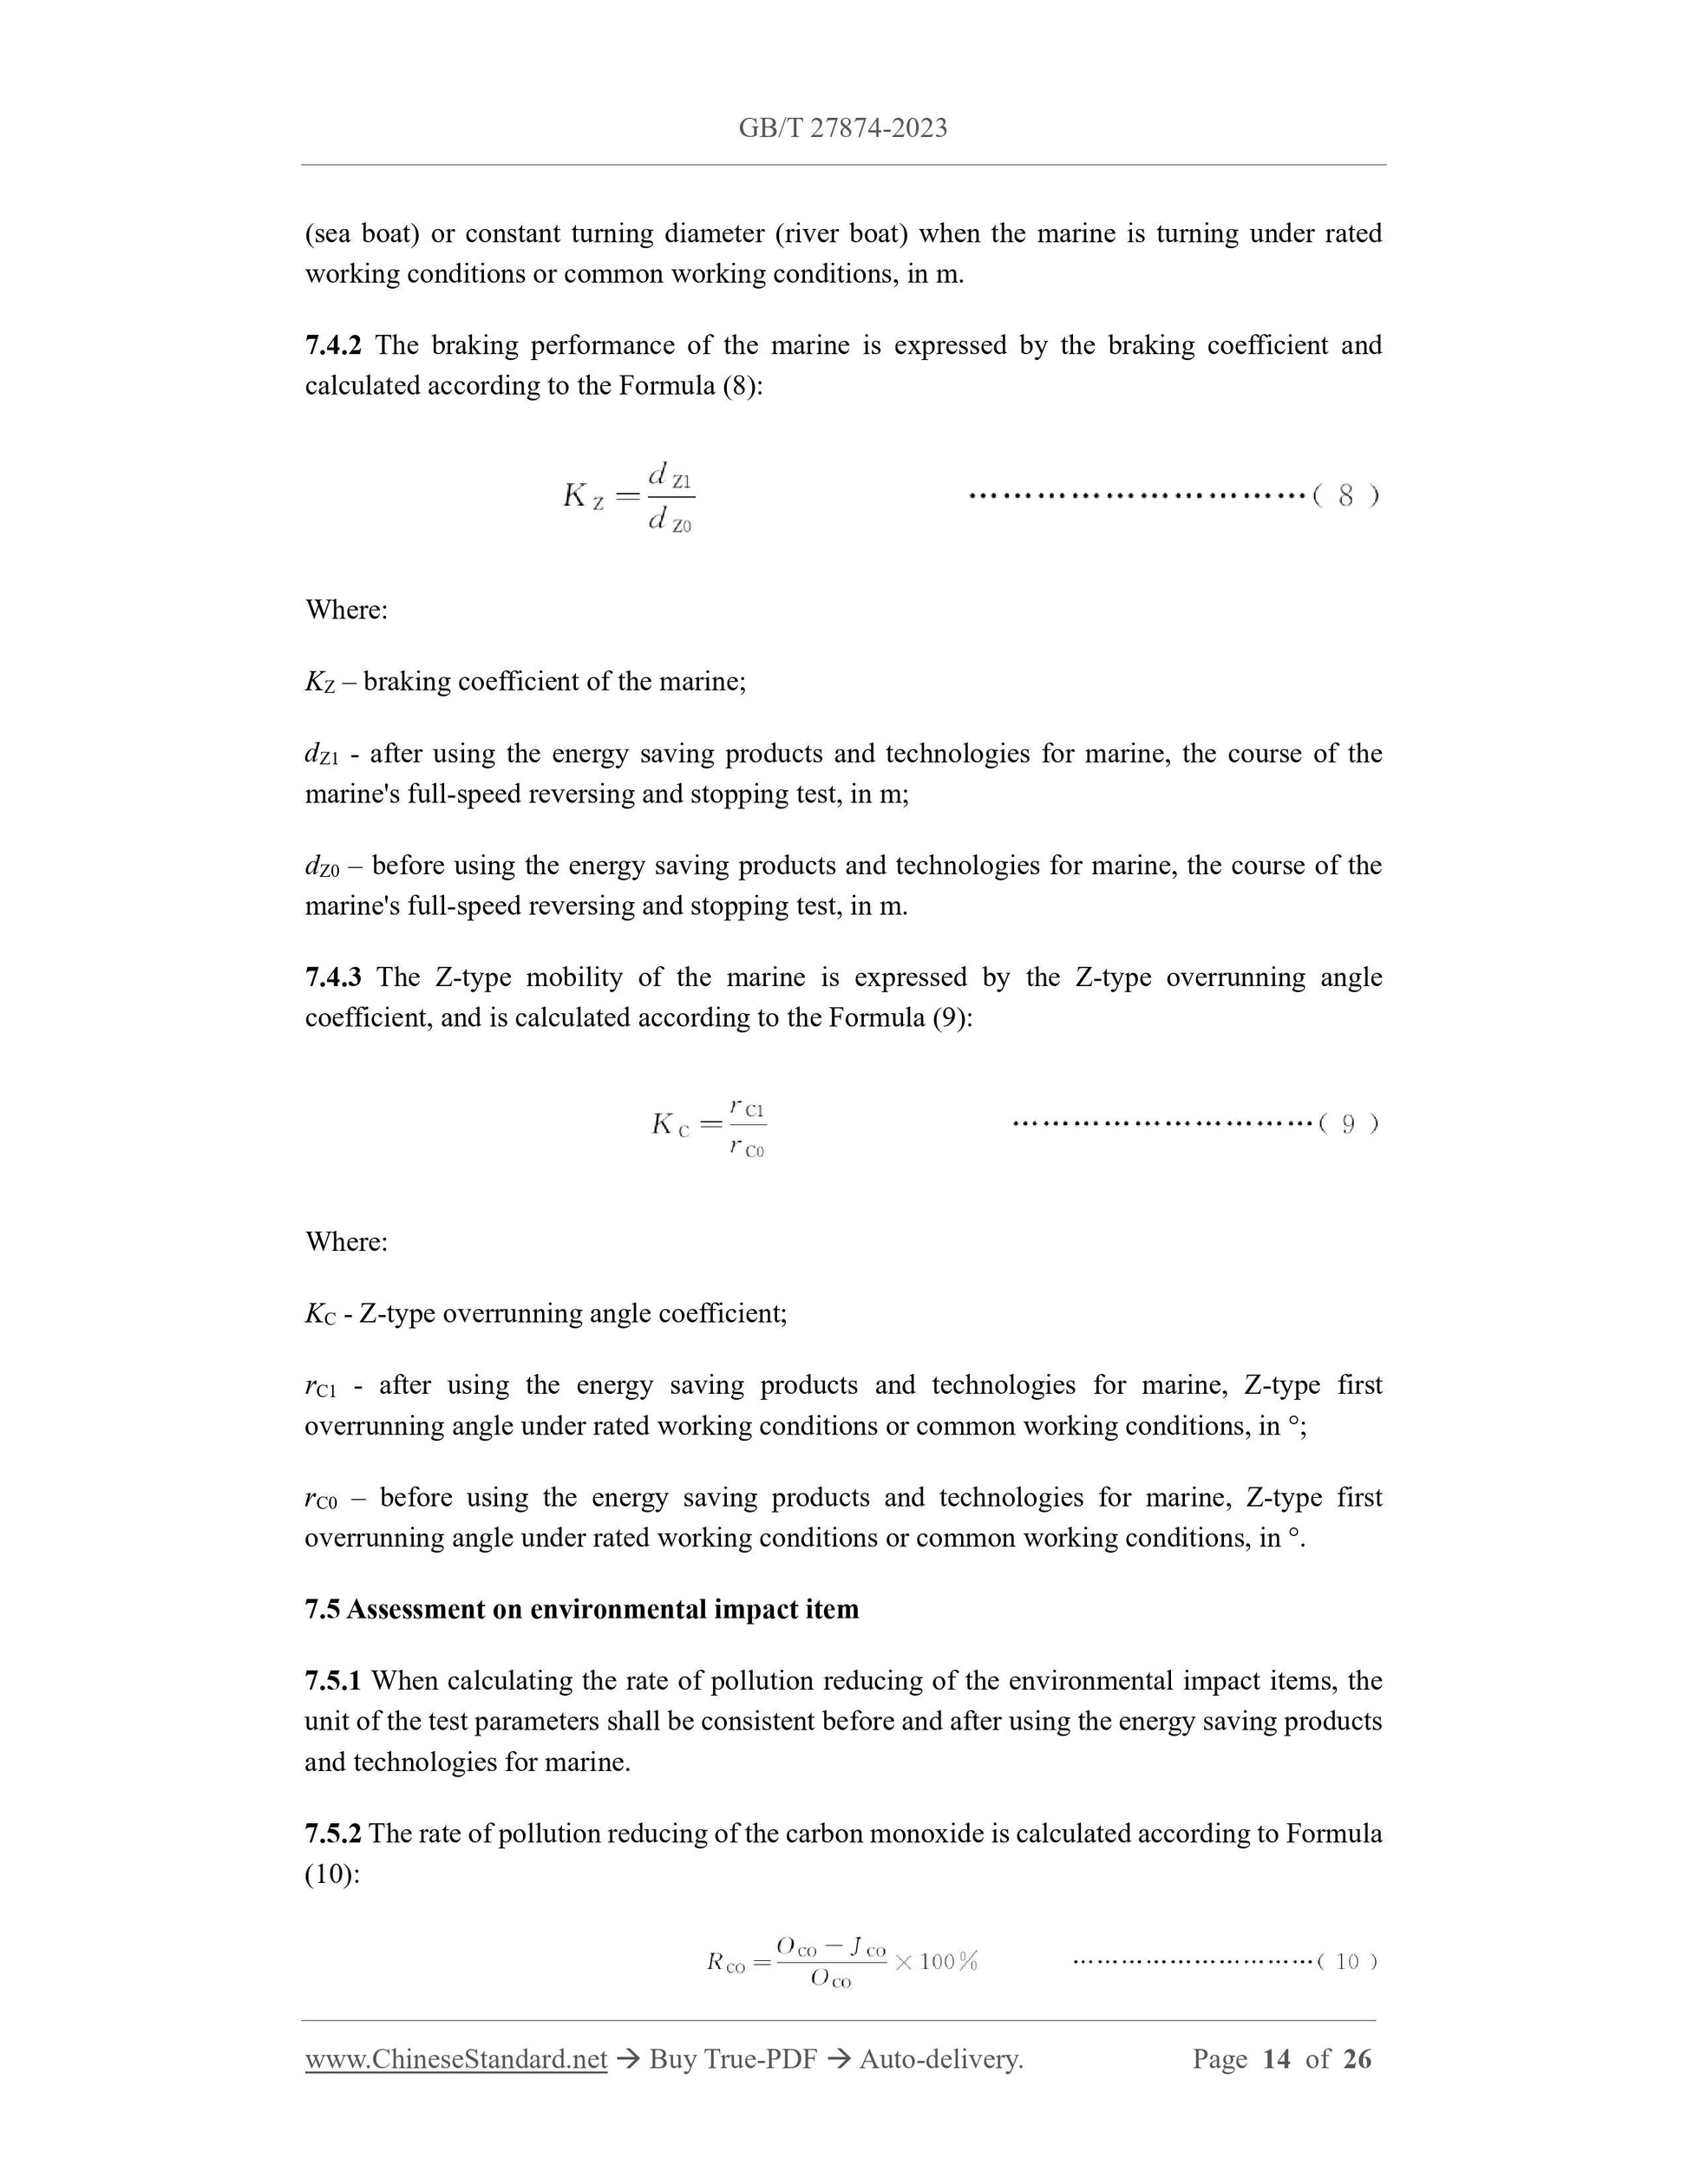 GB/T 27874-2023 Page 8